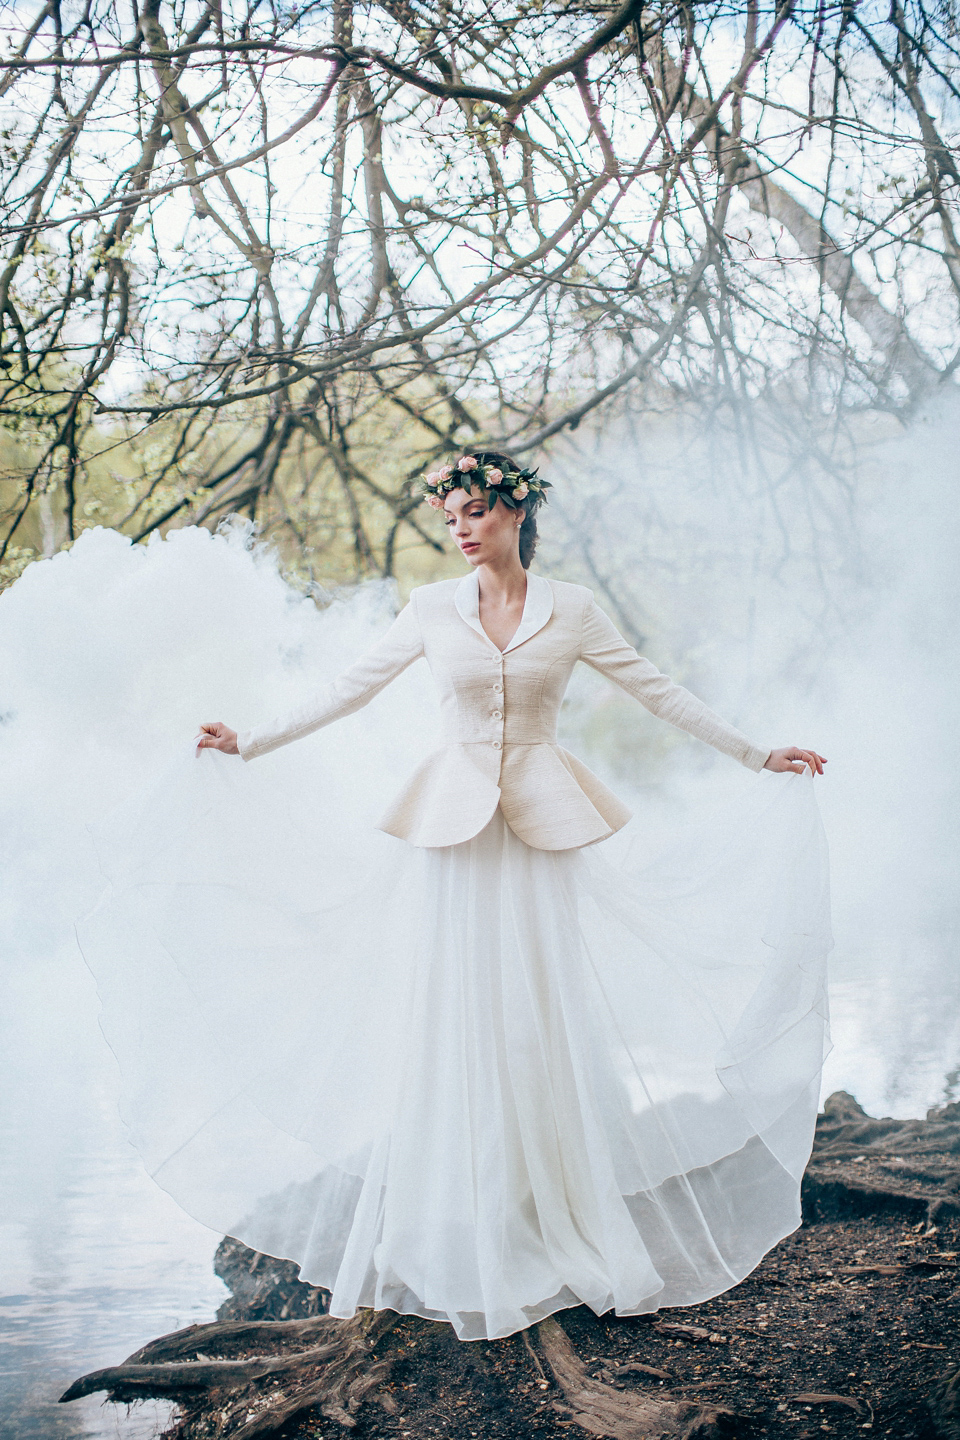 Enchanted Blooms by Sanyukta Shreshtha - a new collection of eco-friendly wedding dresses.